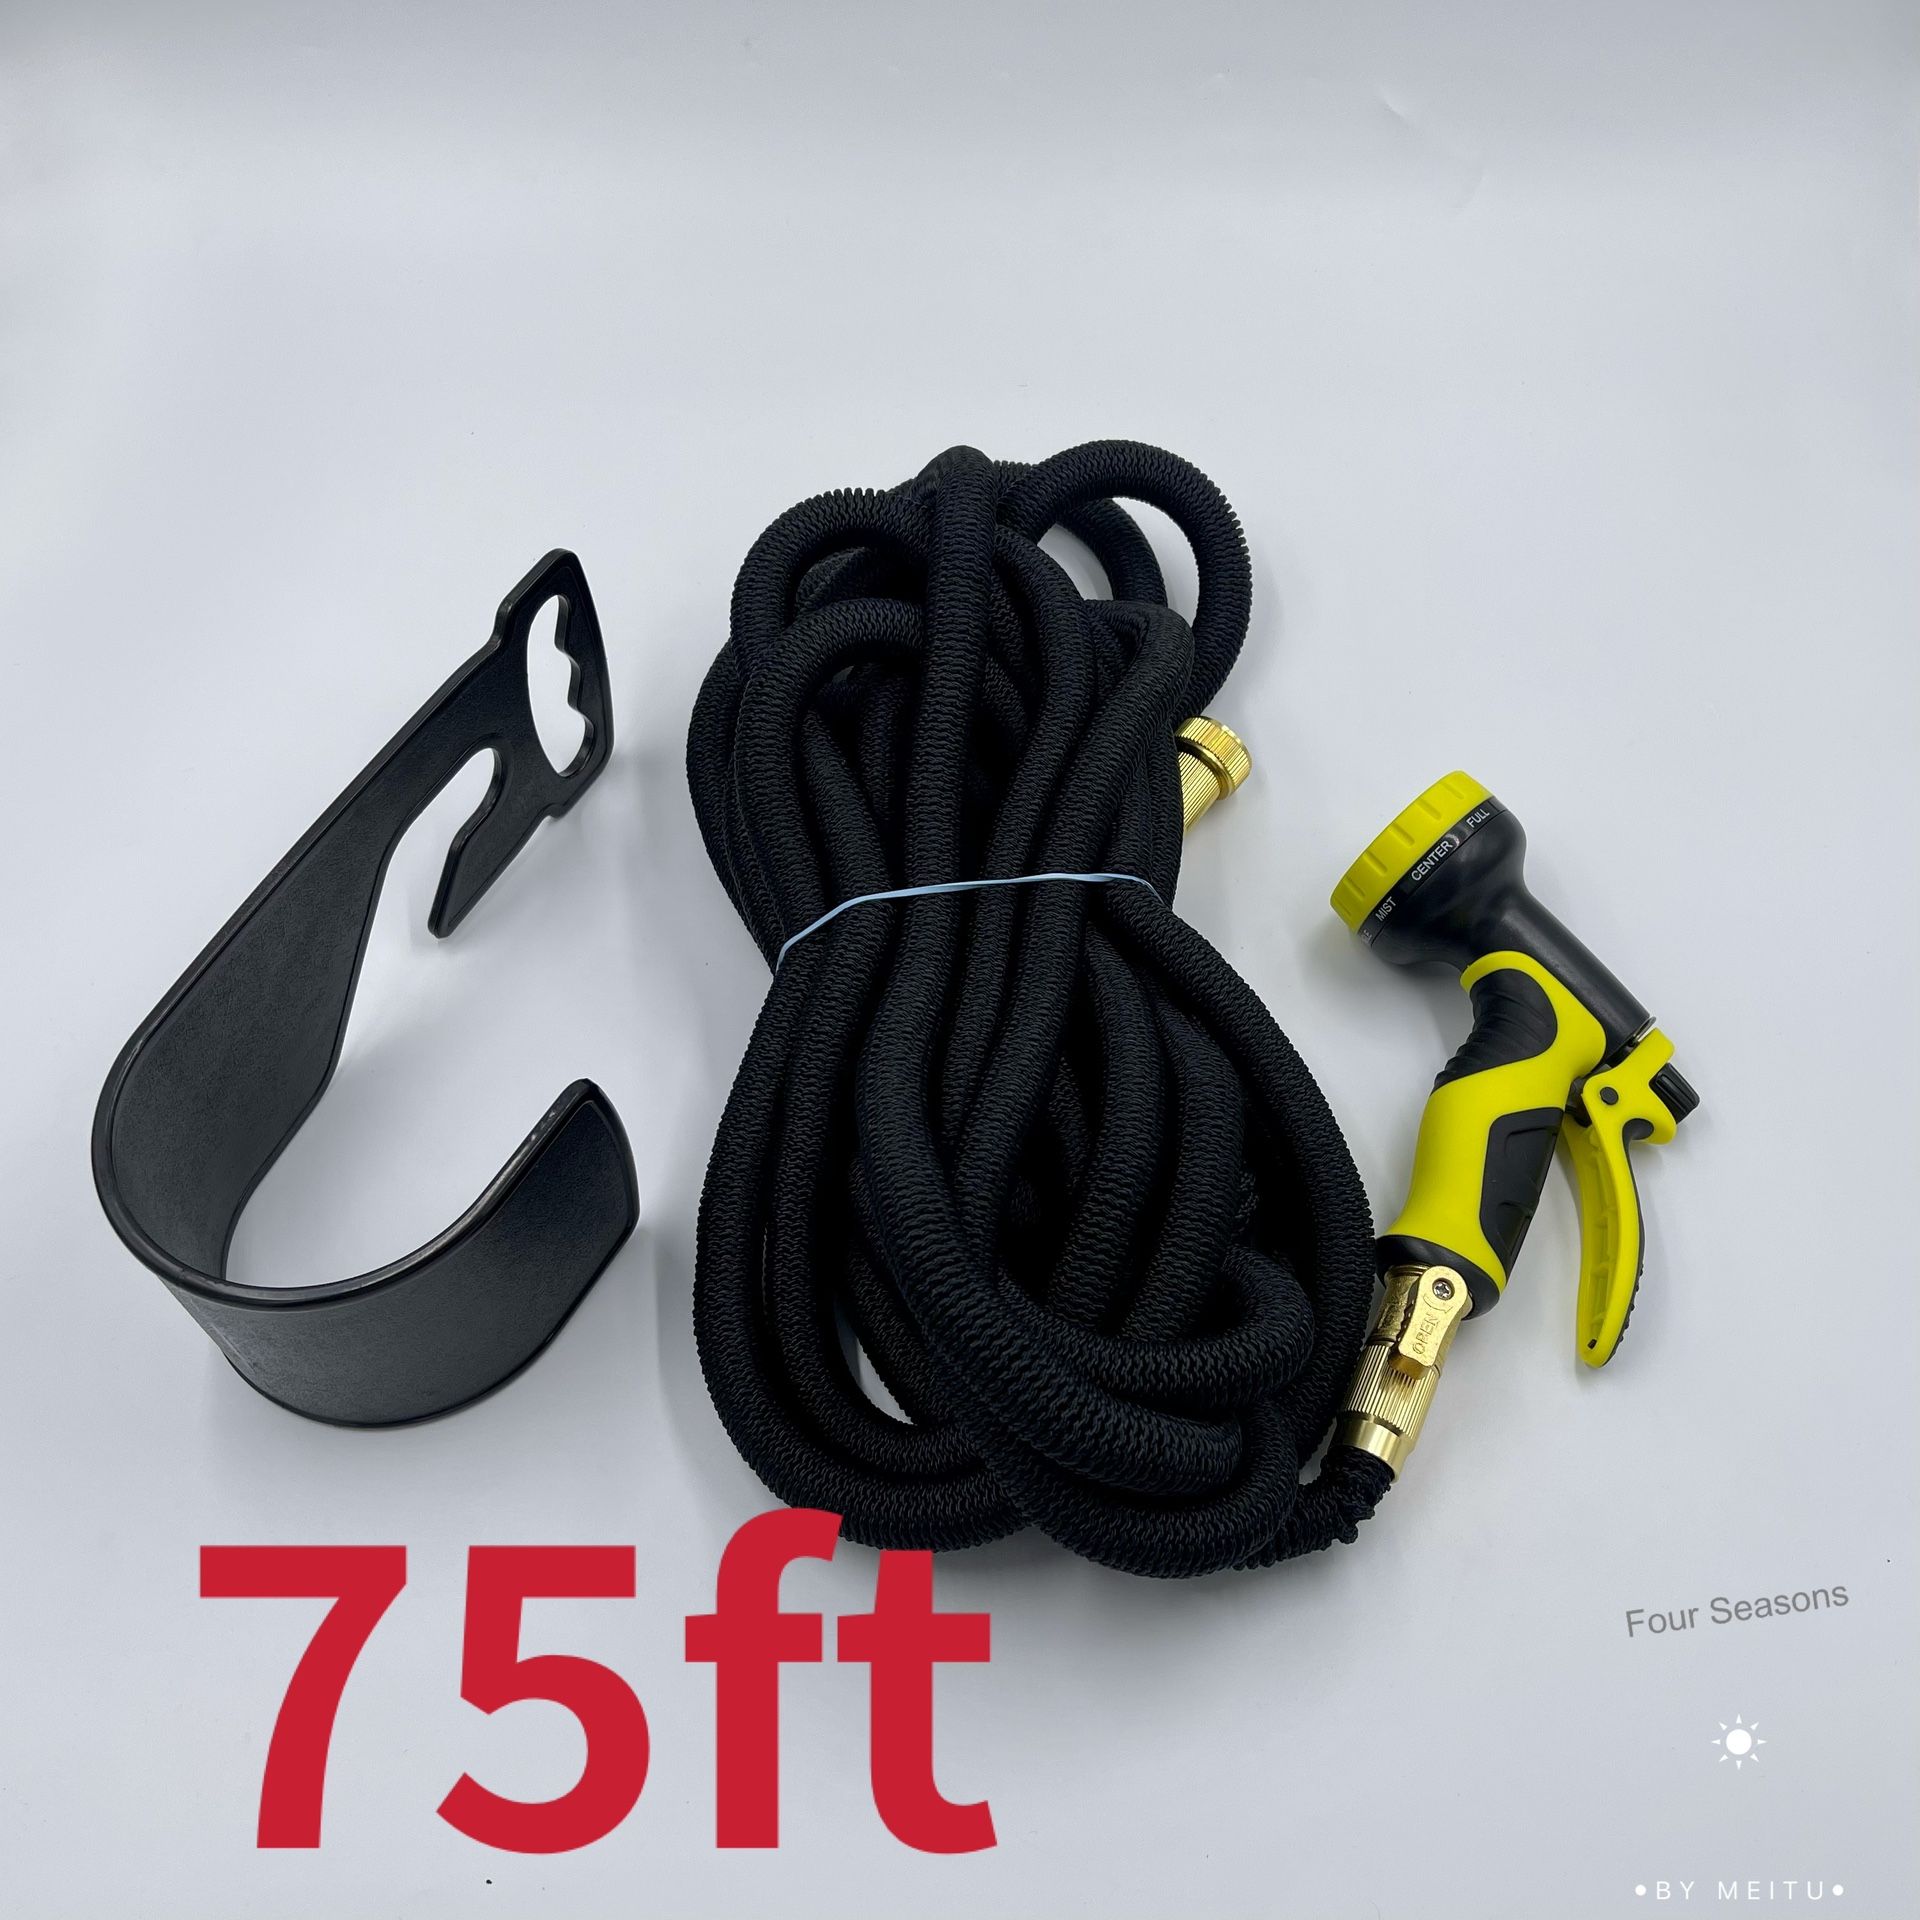 75ft Expandable Garden Hose Water Hose with 10 Function Nozzle, Lightweight & No-Kink Flexible Water Hose with Super Durable 3750D Fabric and Solid Br